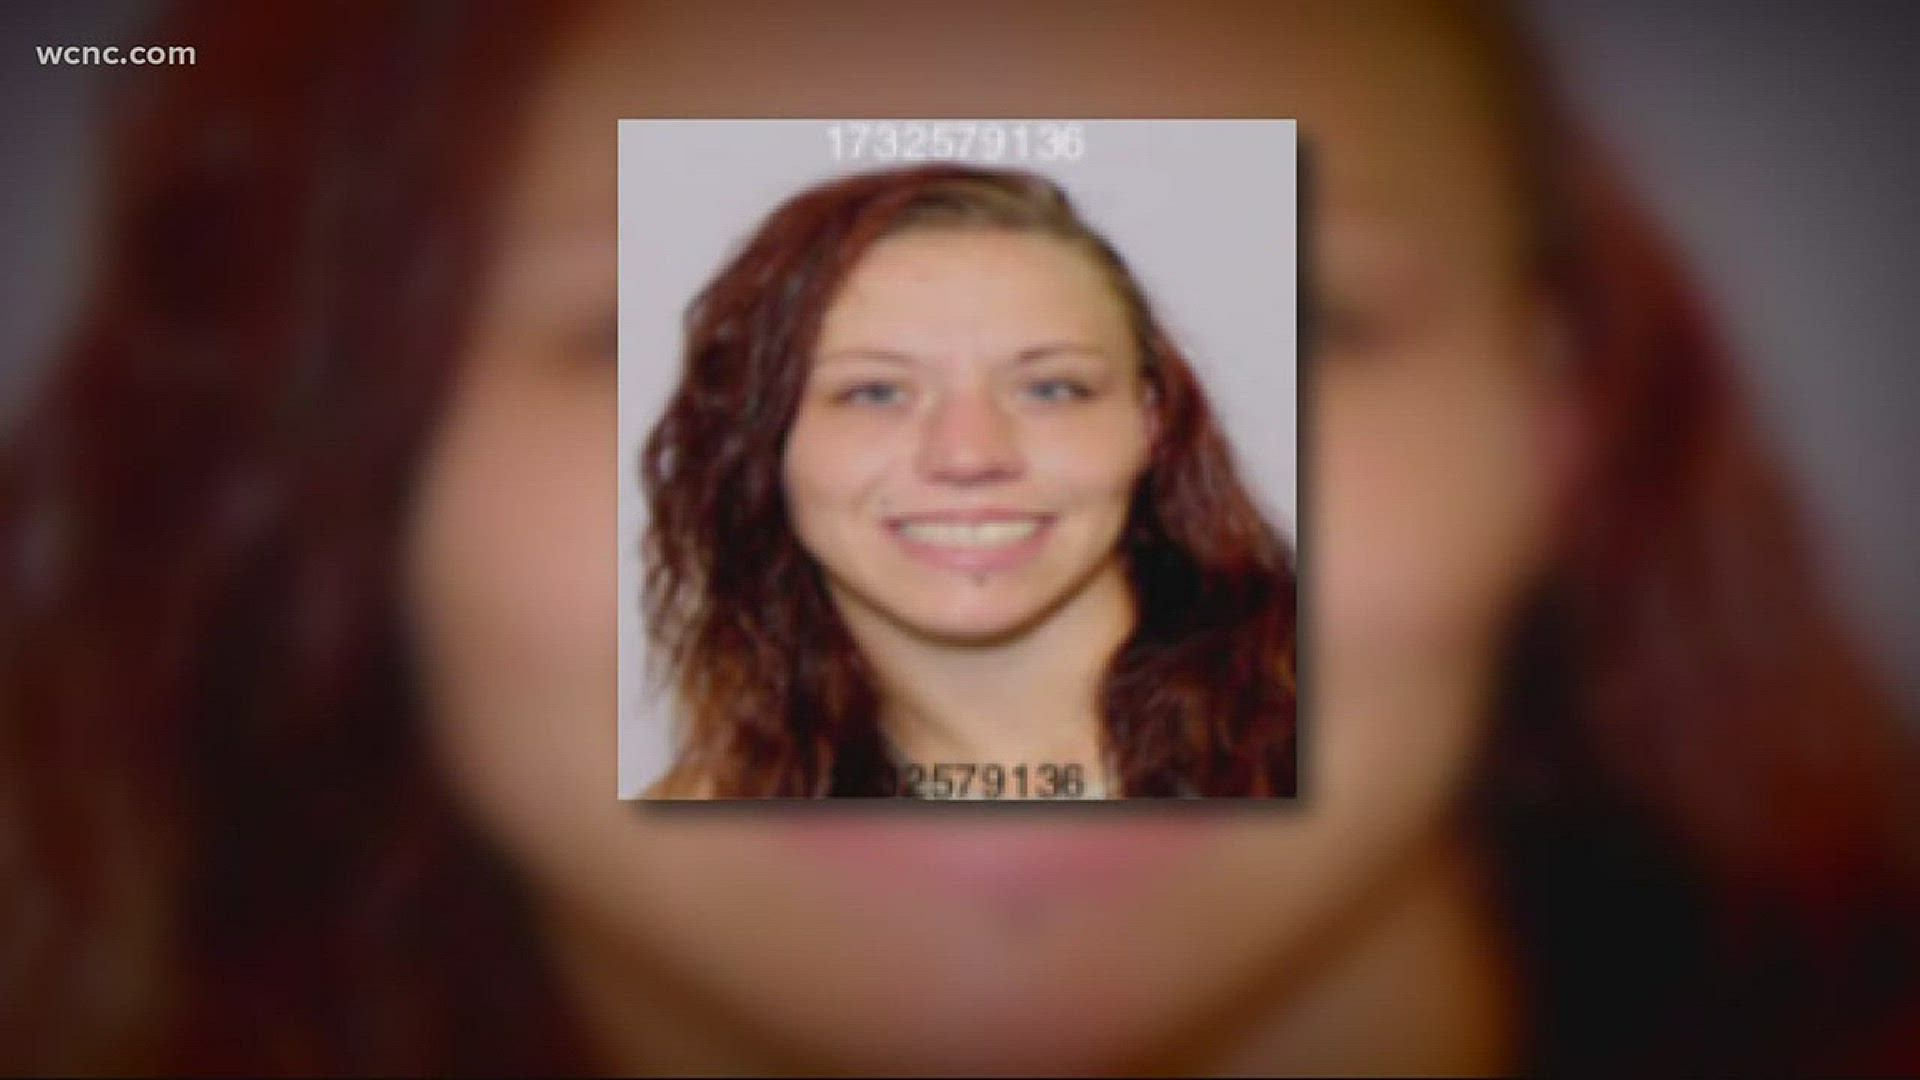 Authorities are searching for a woman accused of firing shots at a deputy in Cleveland County.